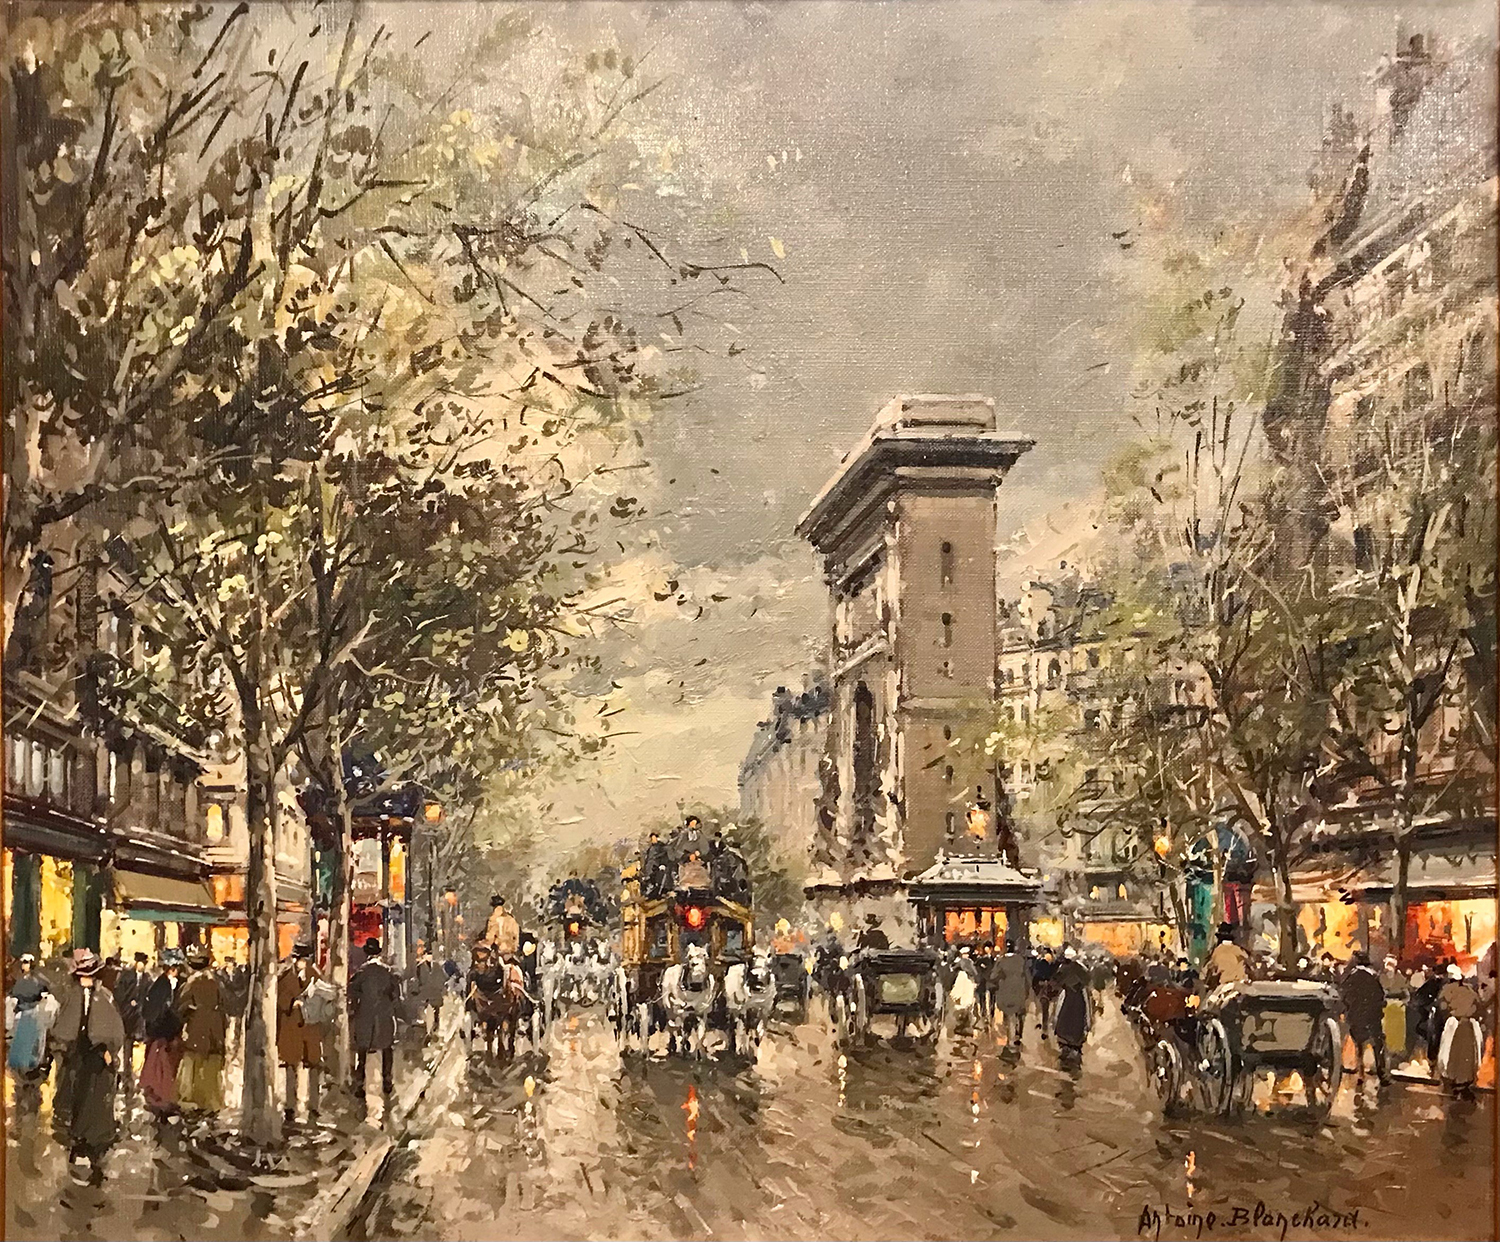 Painting by Antoine Blanchard of Porte St. Denis in Paris with people, horses and buggies